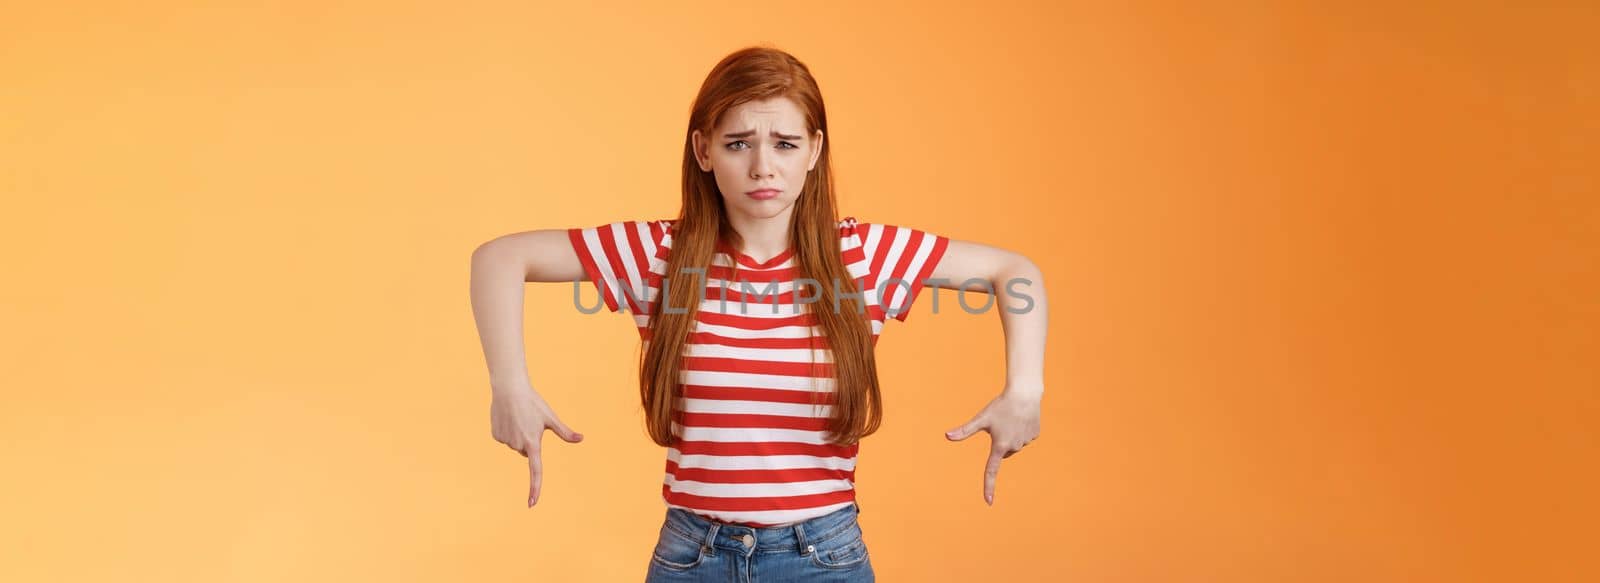 Cute timid hesitant ginger female taking tough decision feel pressured upset, frowning, pulling gloomy unhappy face, pointing down disappointed, uneasy taking decision, orange background by Benzoix